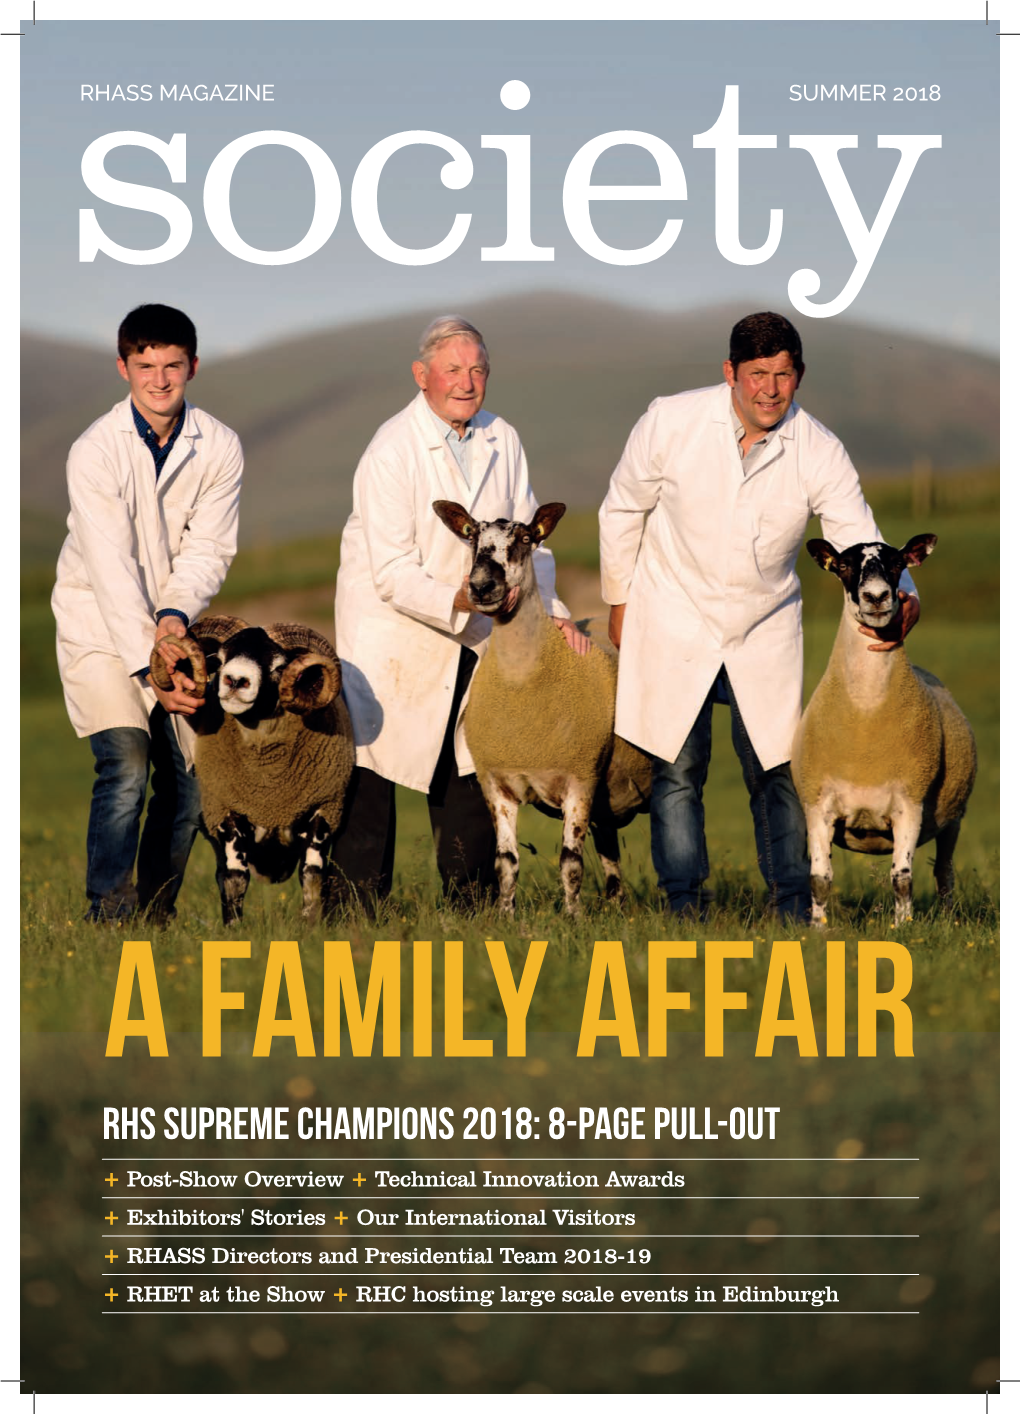 RHS Supreme Champions 2018: 8-Page Pull-Out